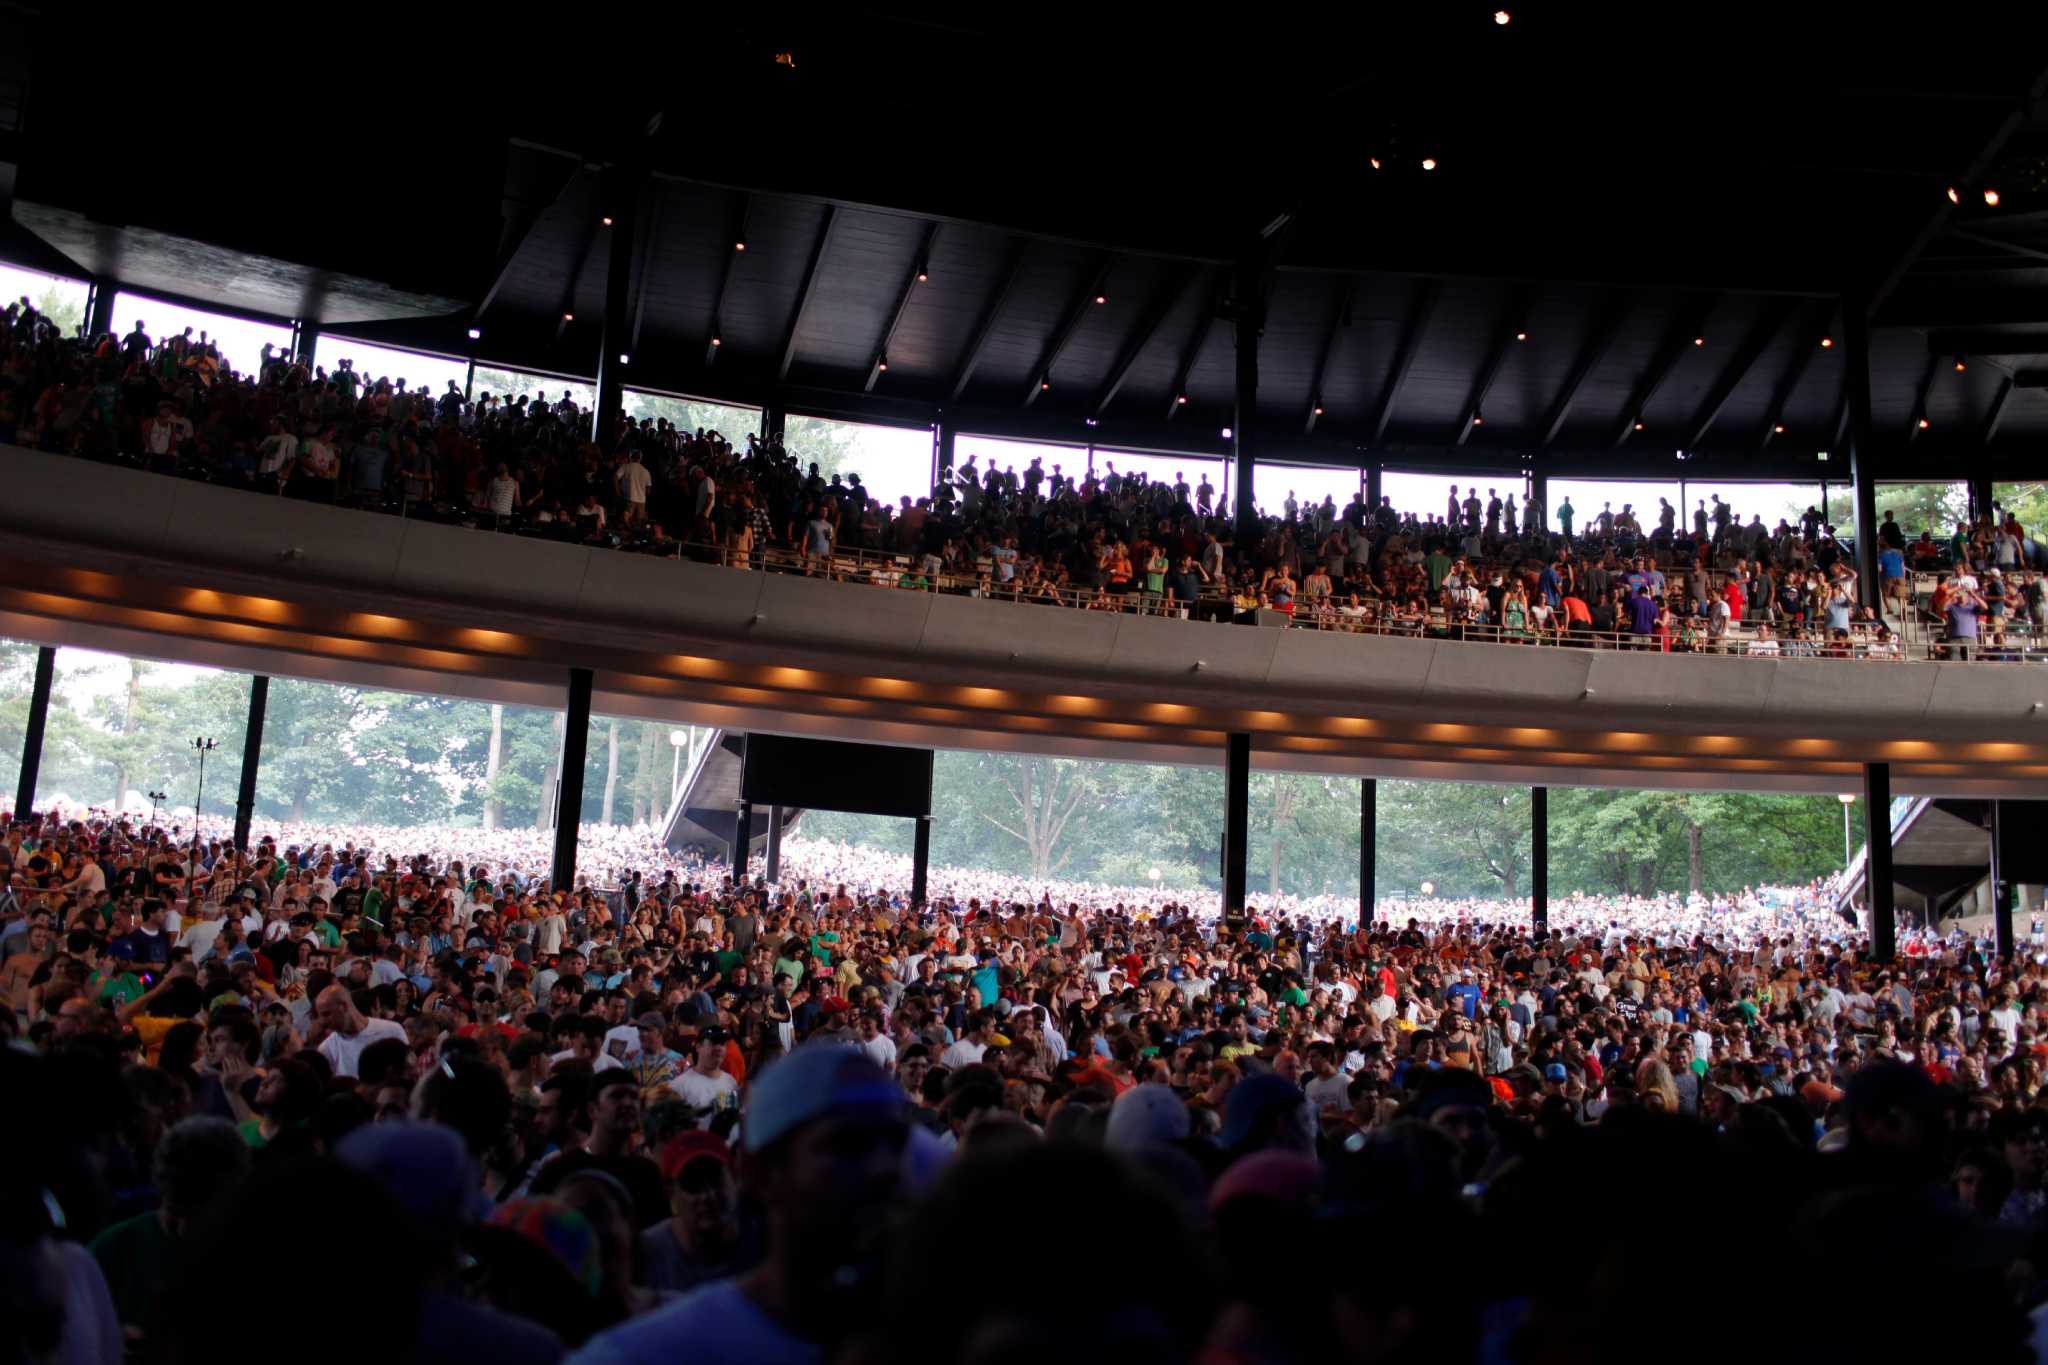 Tips for making the most of the SPAC experience